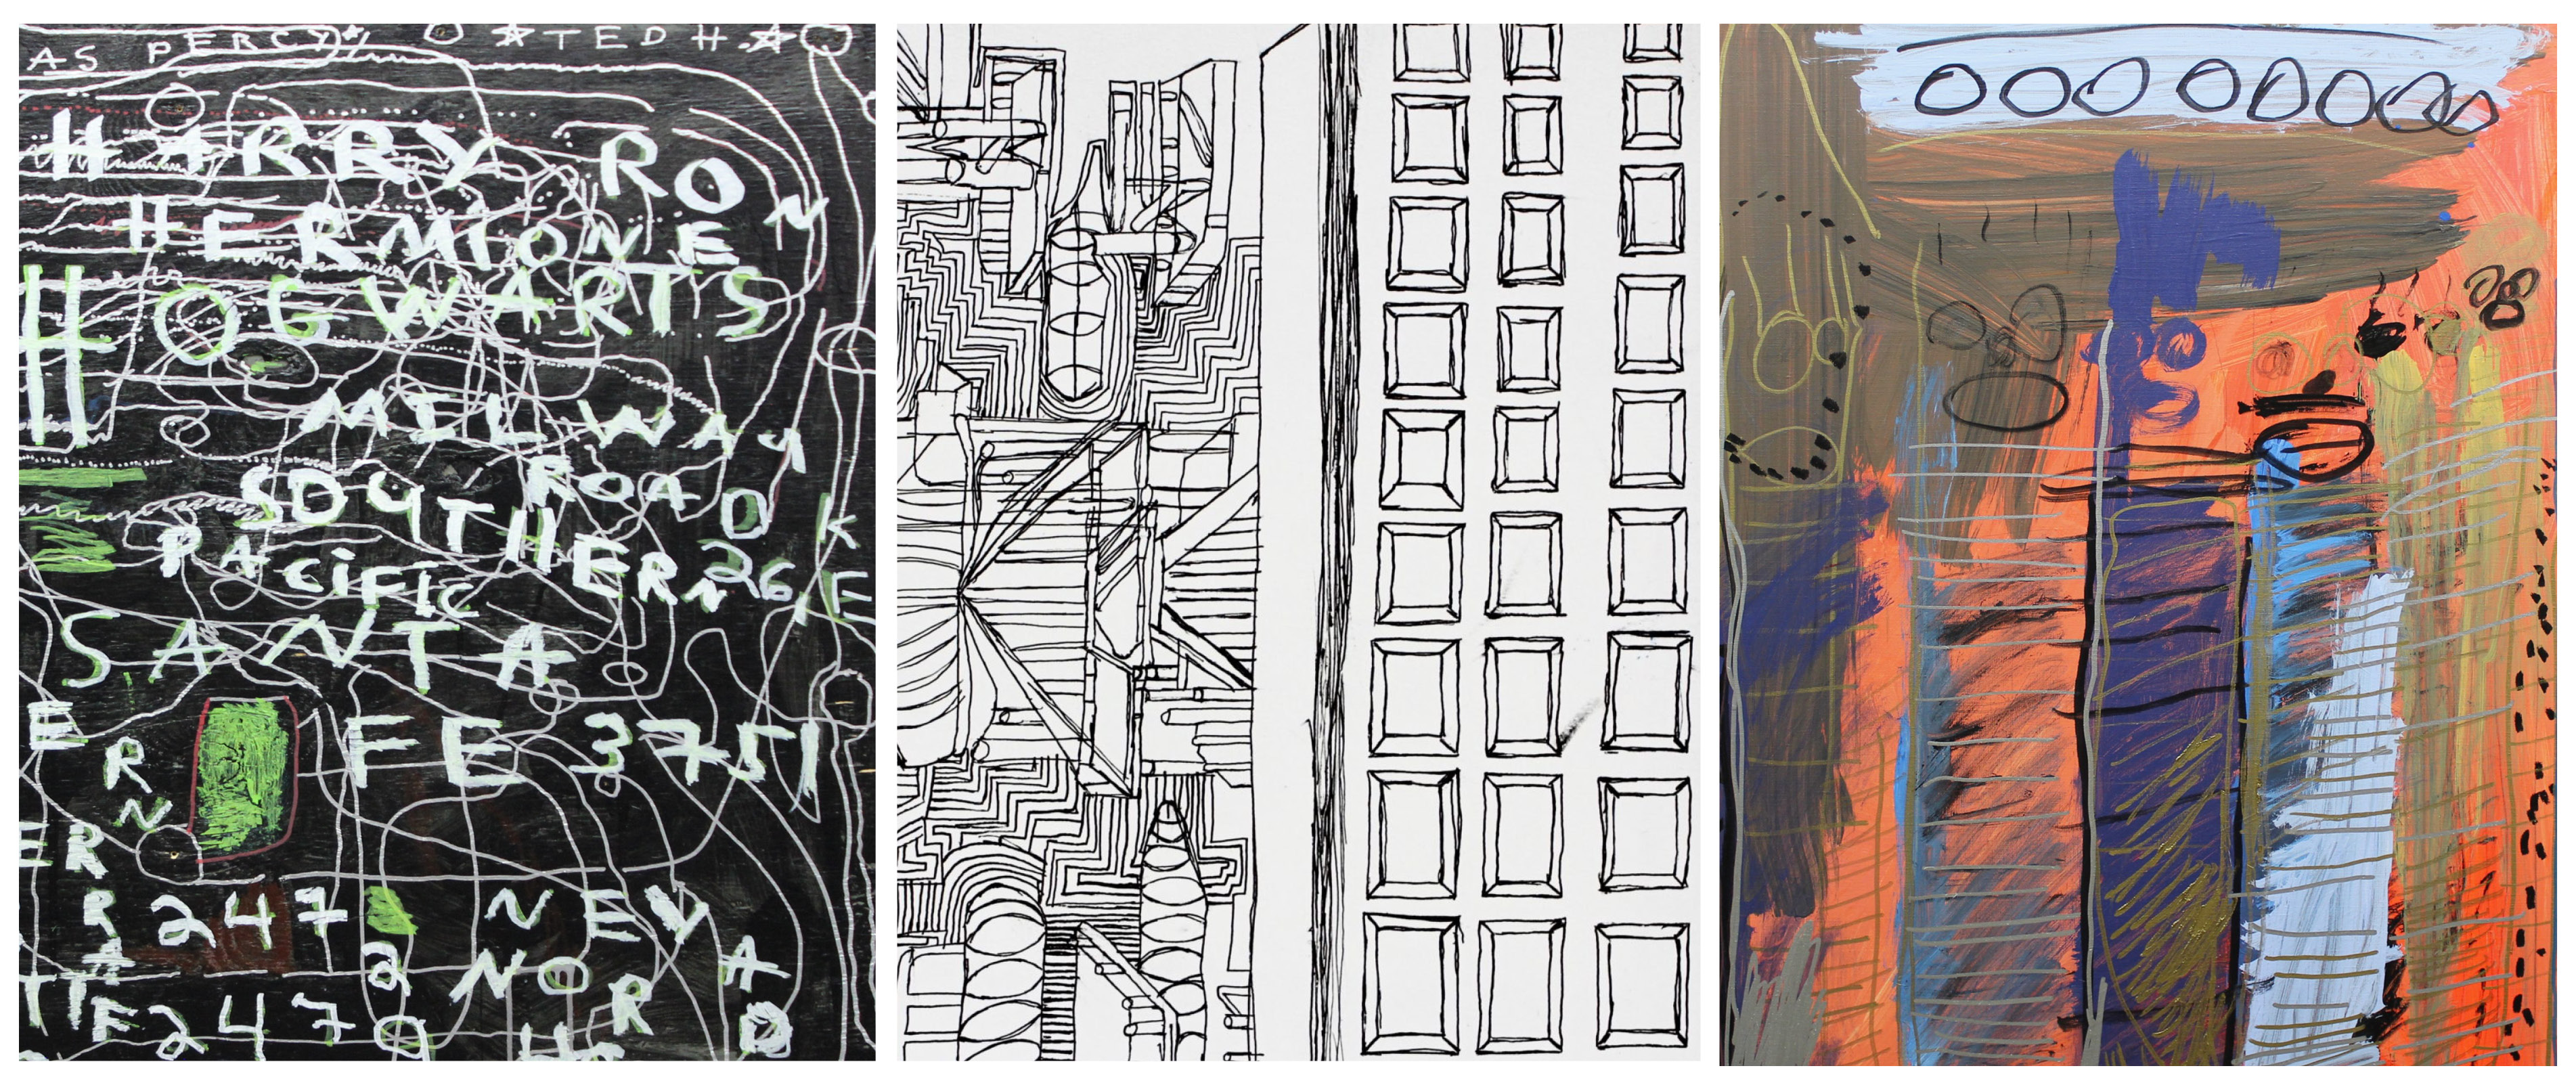 Cover image (L to R): Ted Hamel, Thomas Percy (detail), 2020, Marcelo Añón, Divergent The Fence Chicago (detail), 2021, Billy Borgerd, Wrestling Girls, 2019.